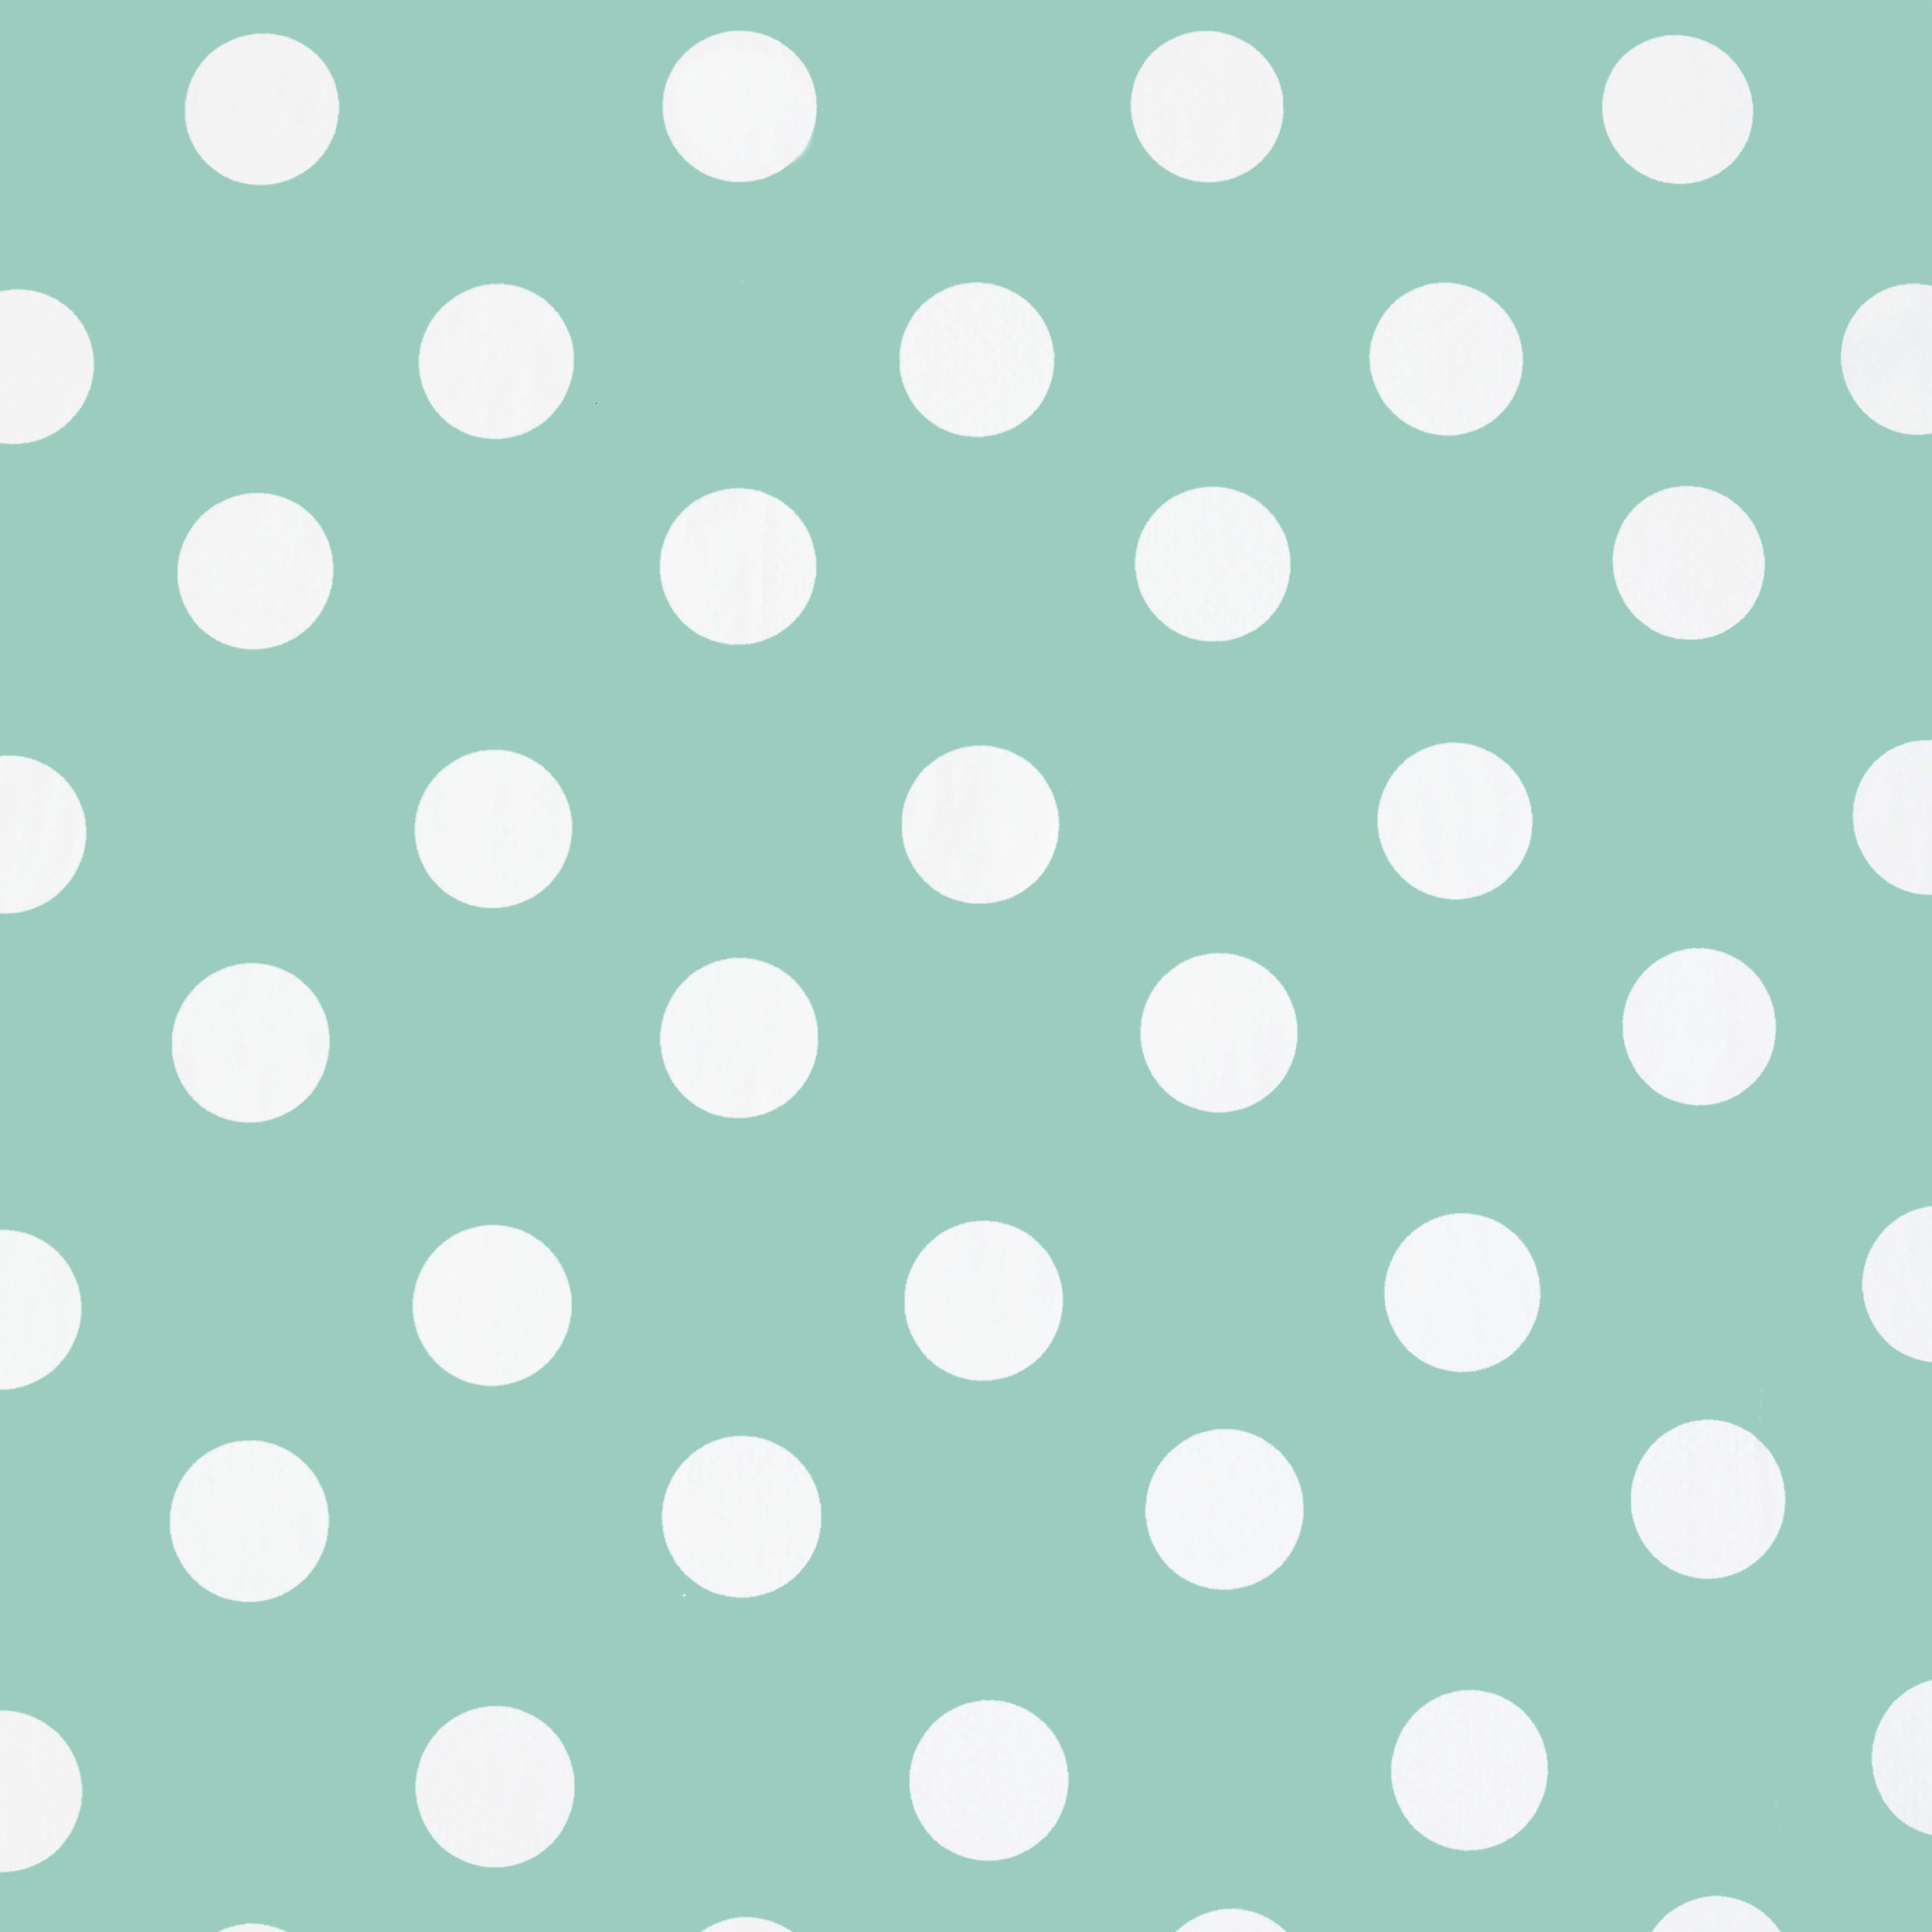 Free Black And White Polka Dot Background Free Download Free Black And